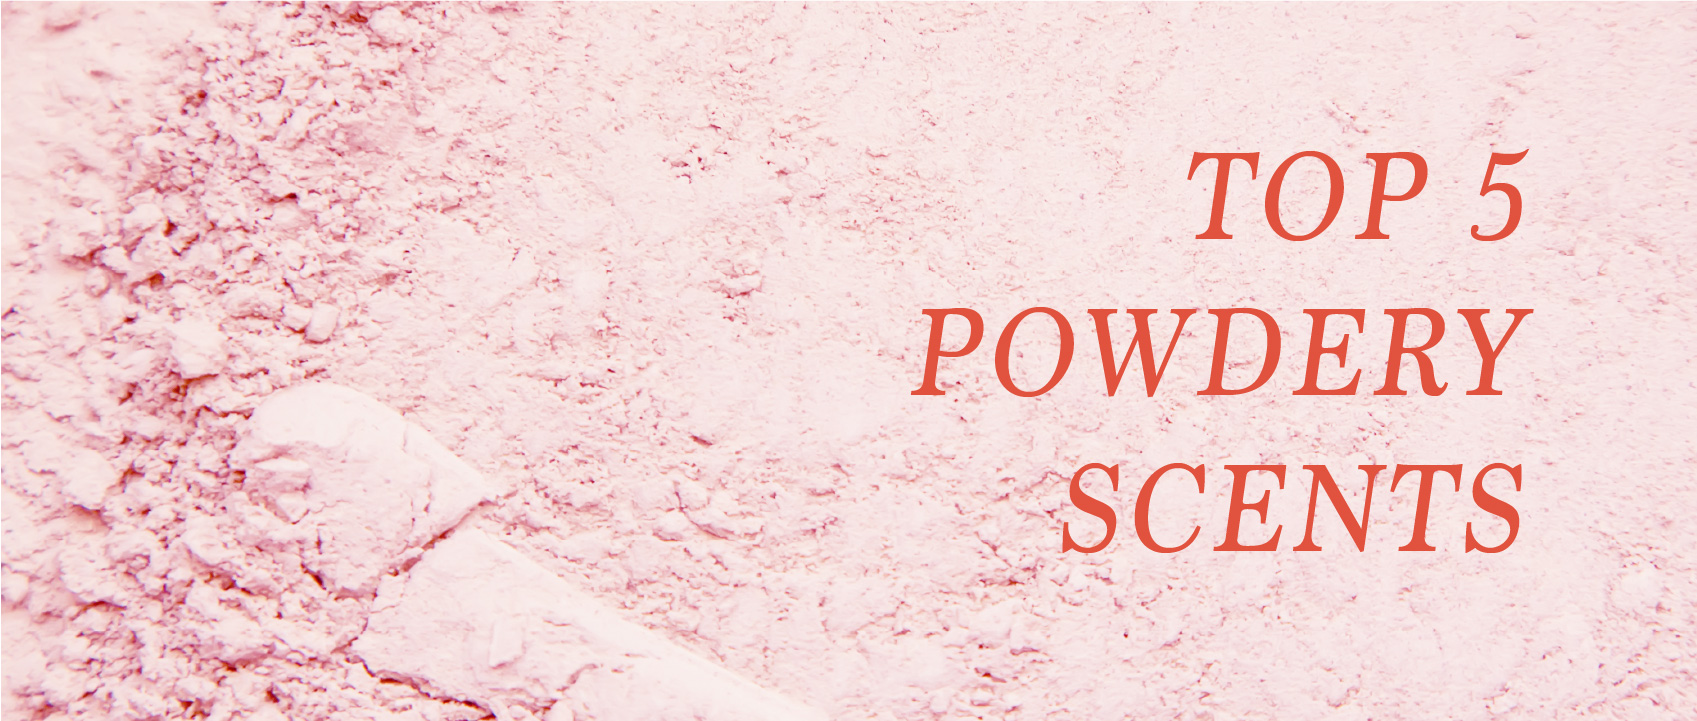 pink powder with top 5 powdery scents